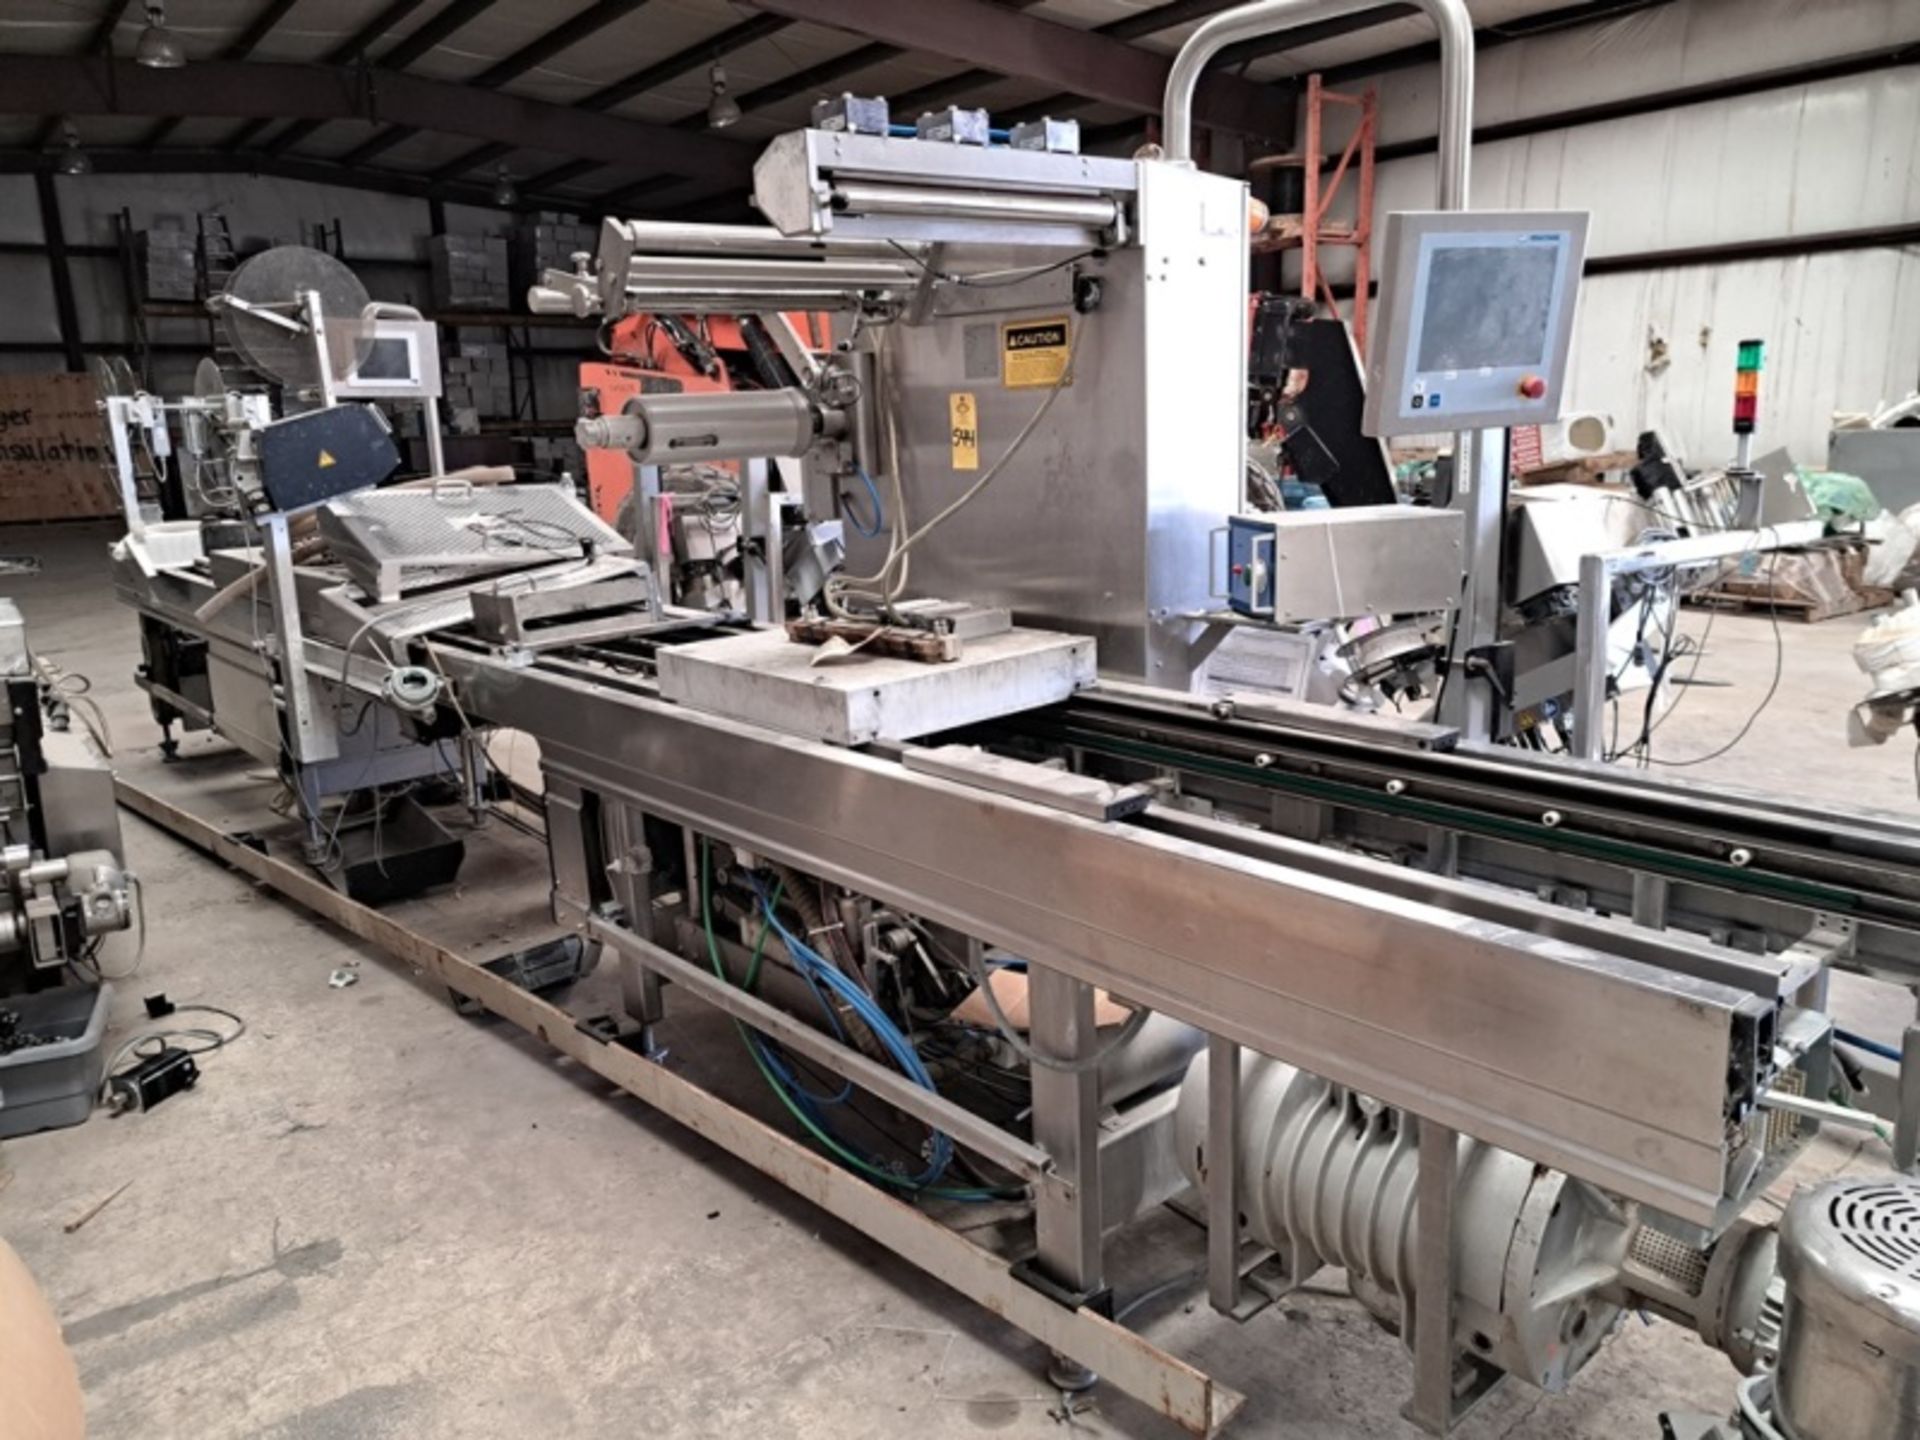 Multivac Mdl. R530 Rollstock Thermoforming Packaging Machine, Ser. #120832, Mfg. 2008, 230 volts, - Image 5 of 16